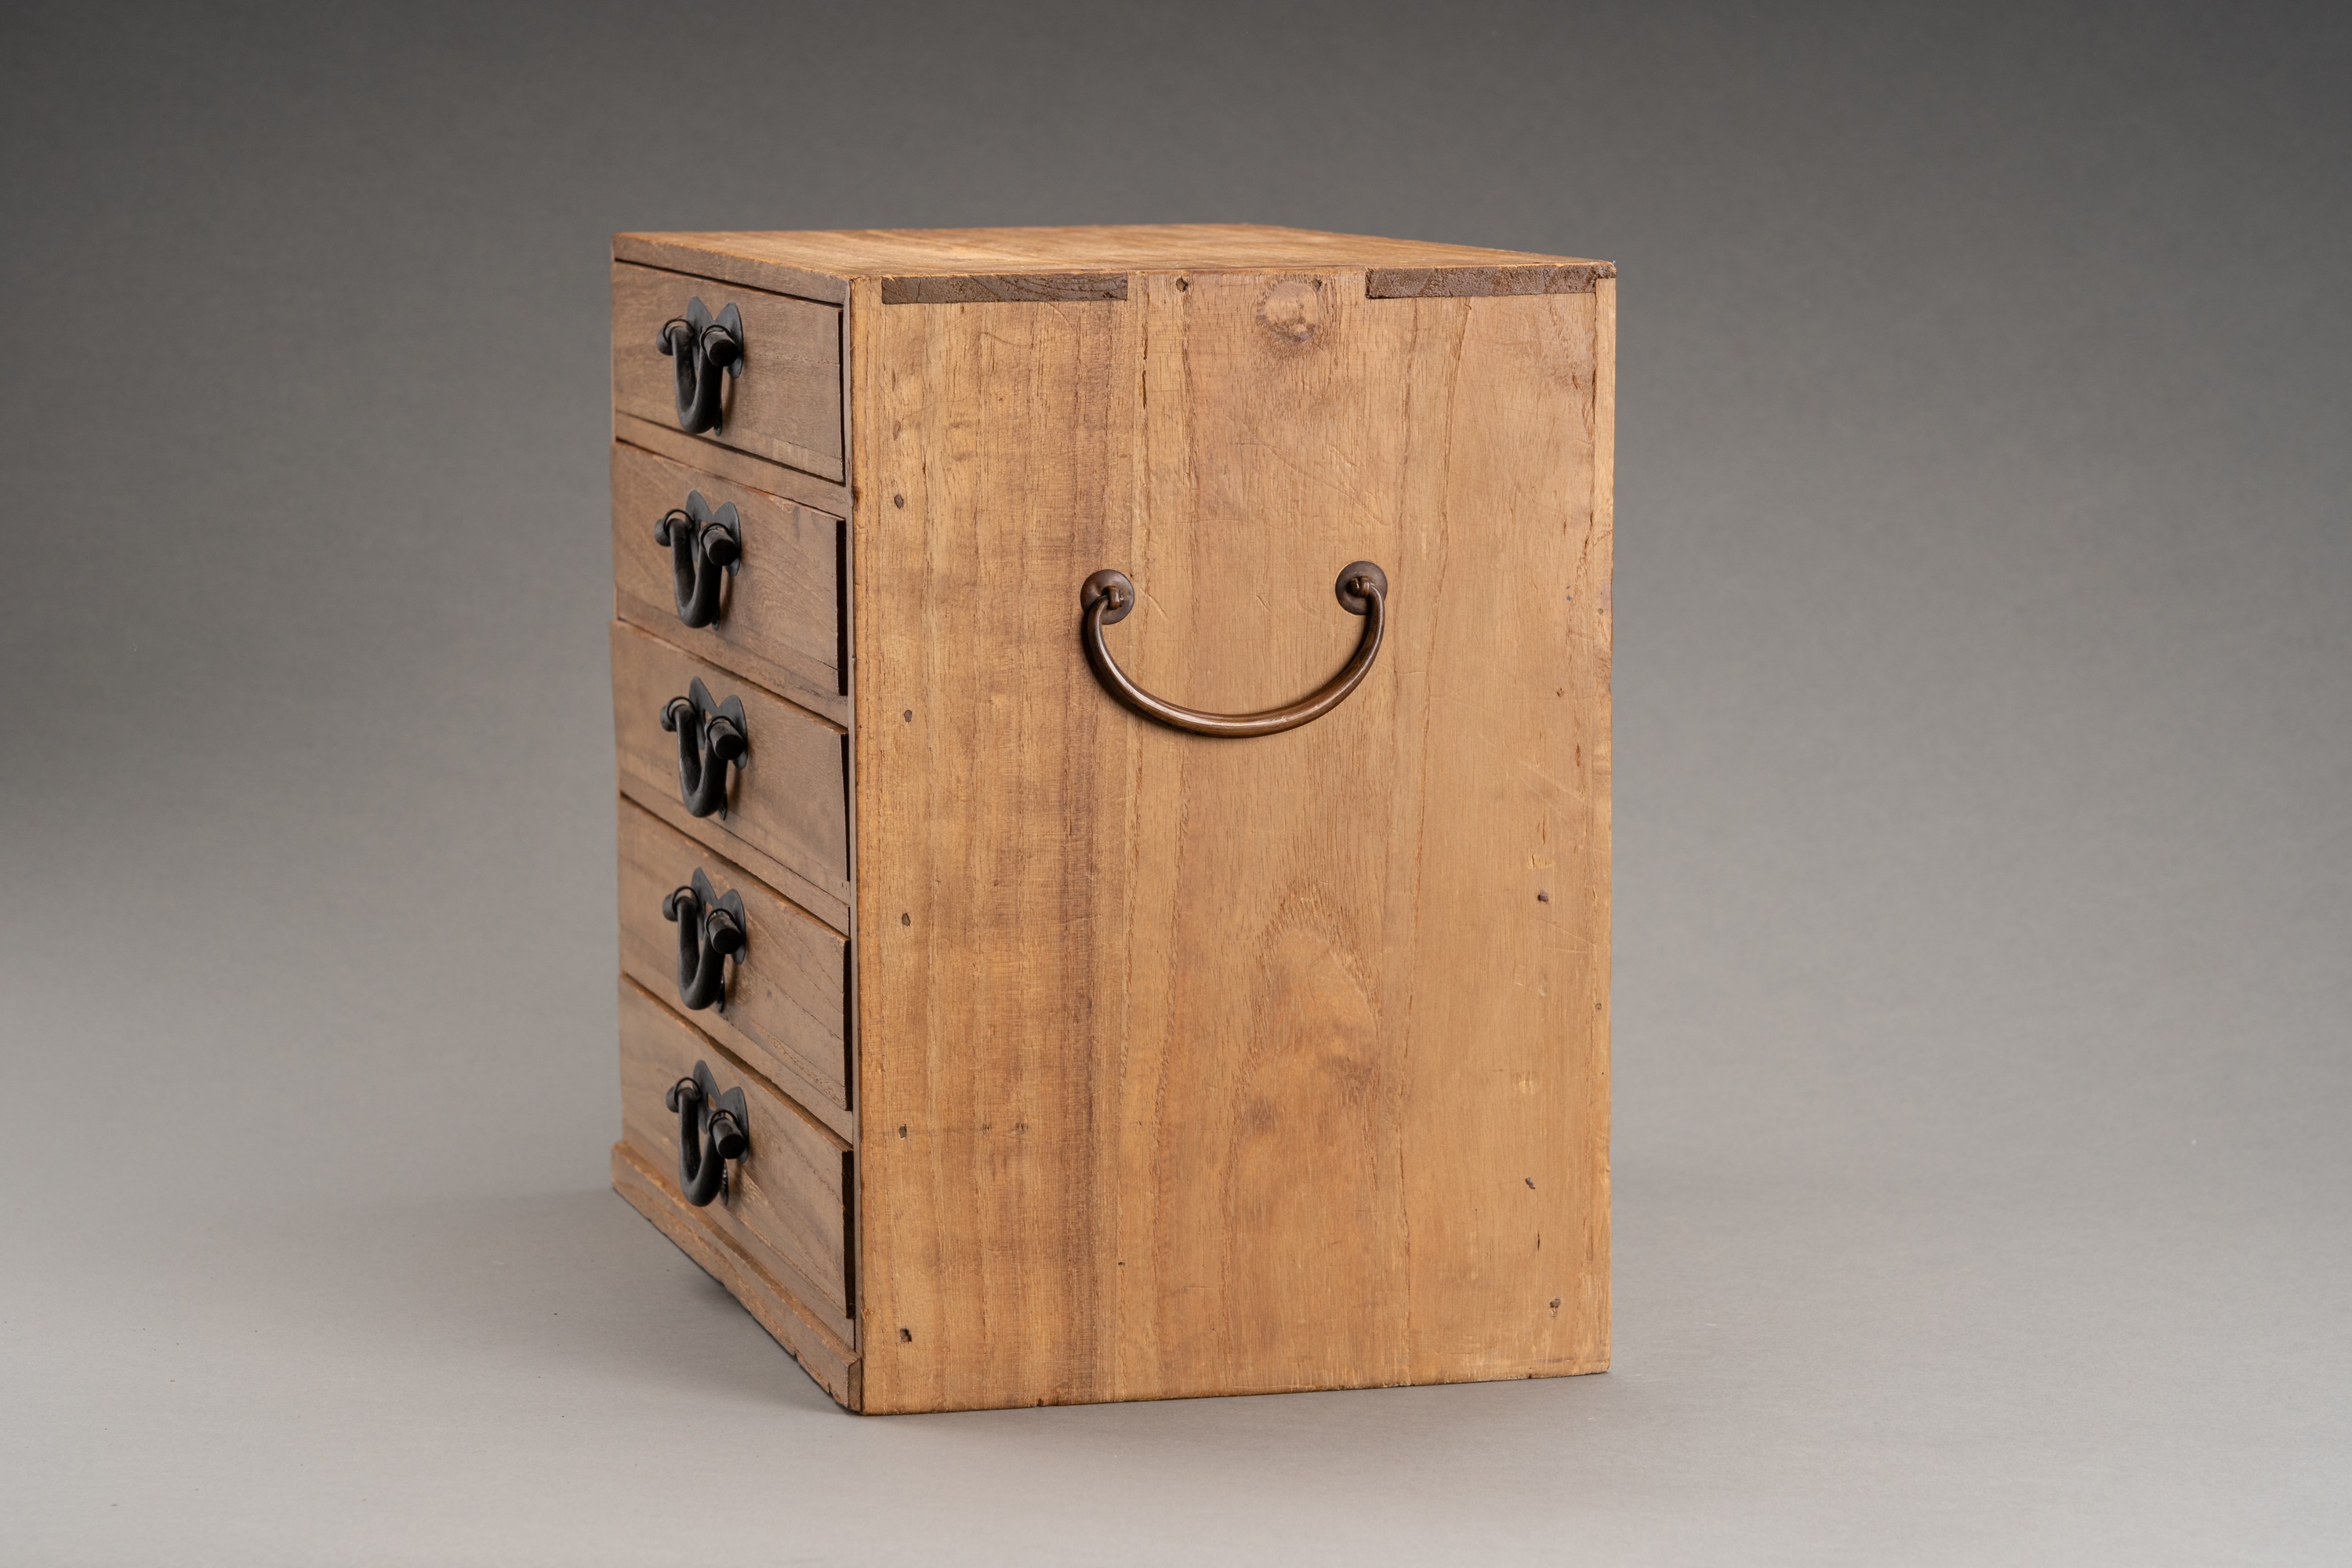 A WOODEN JAPANESE STORAGE BOX WITH 5 DRAWERS - Image 6 of 8